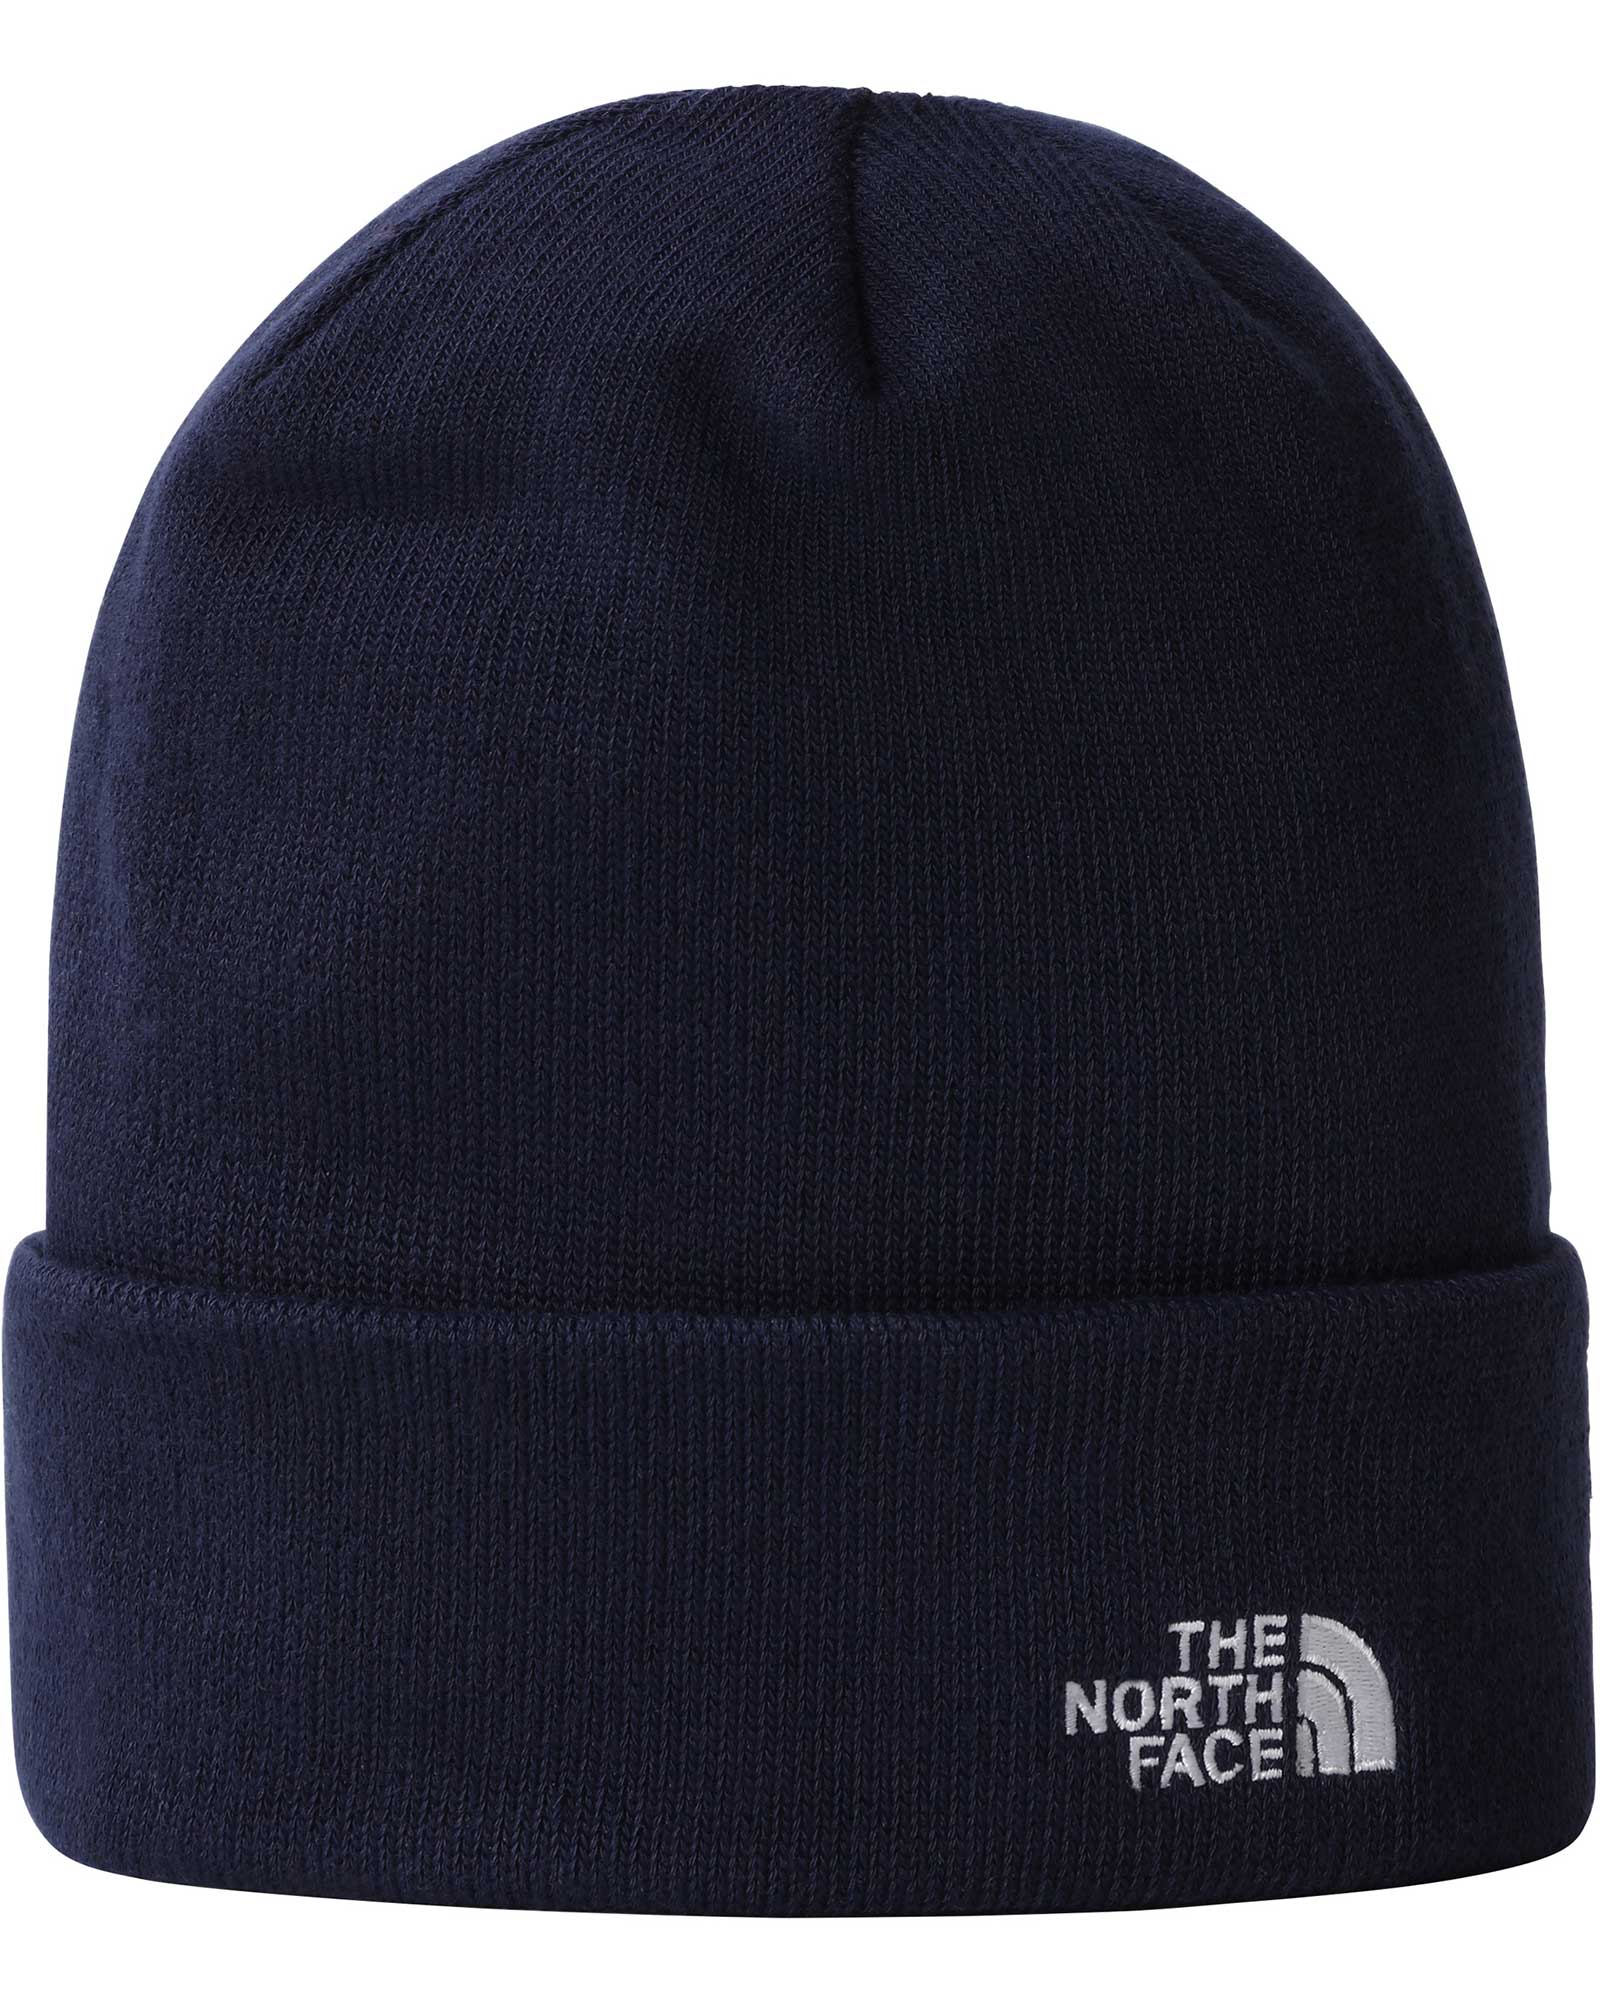 The North Face Norm Beanie - Summit Navy